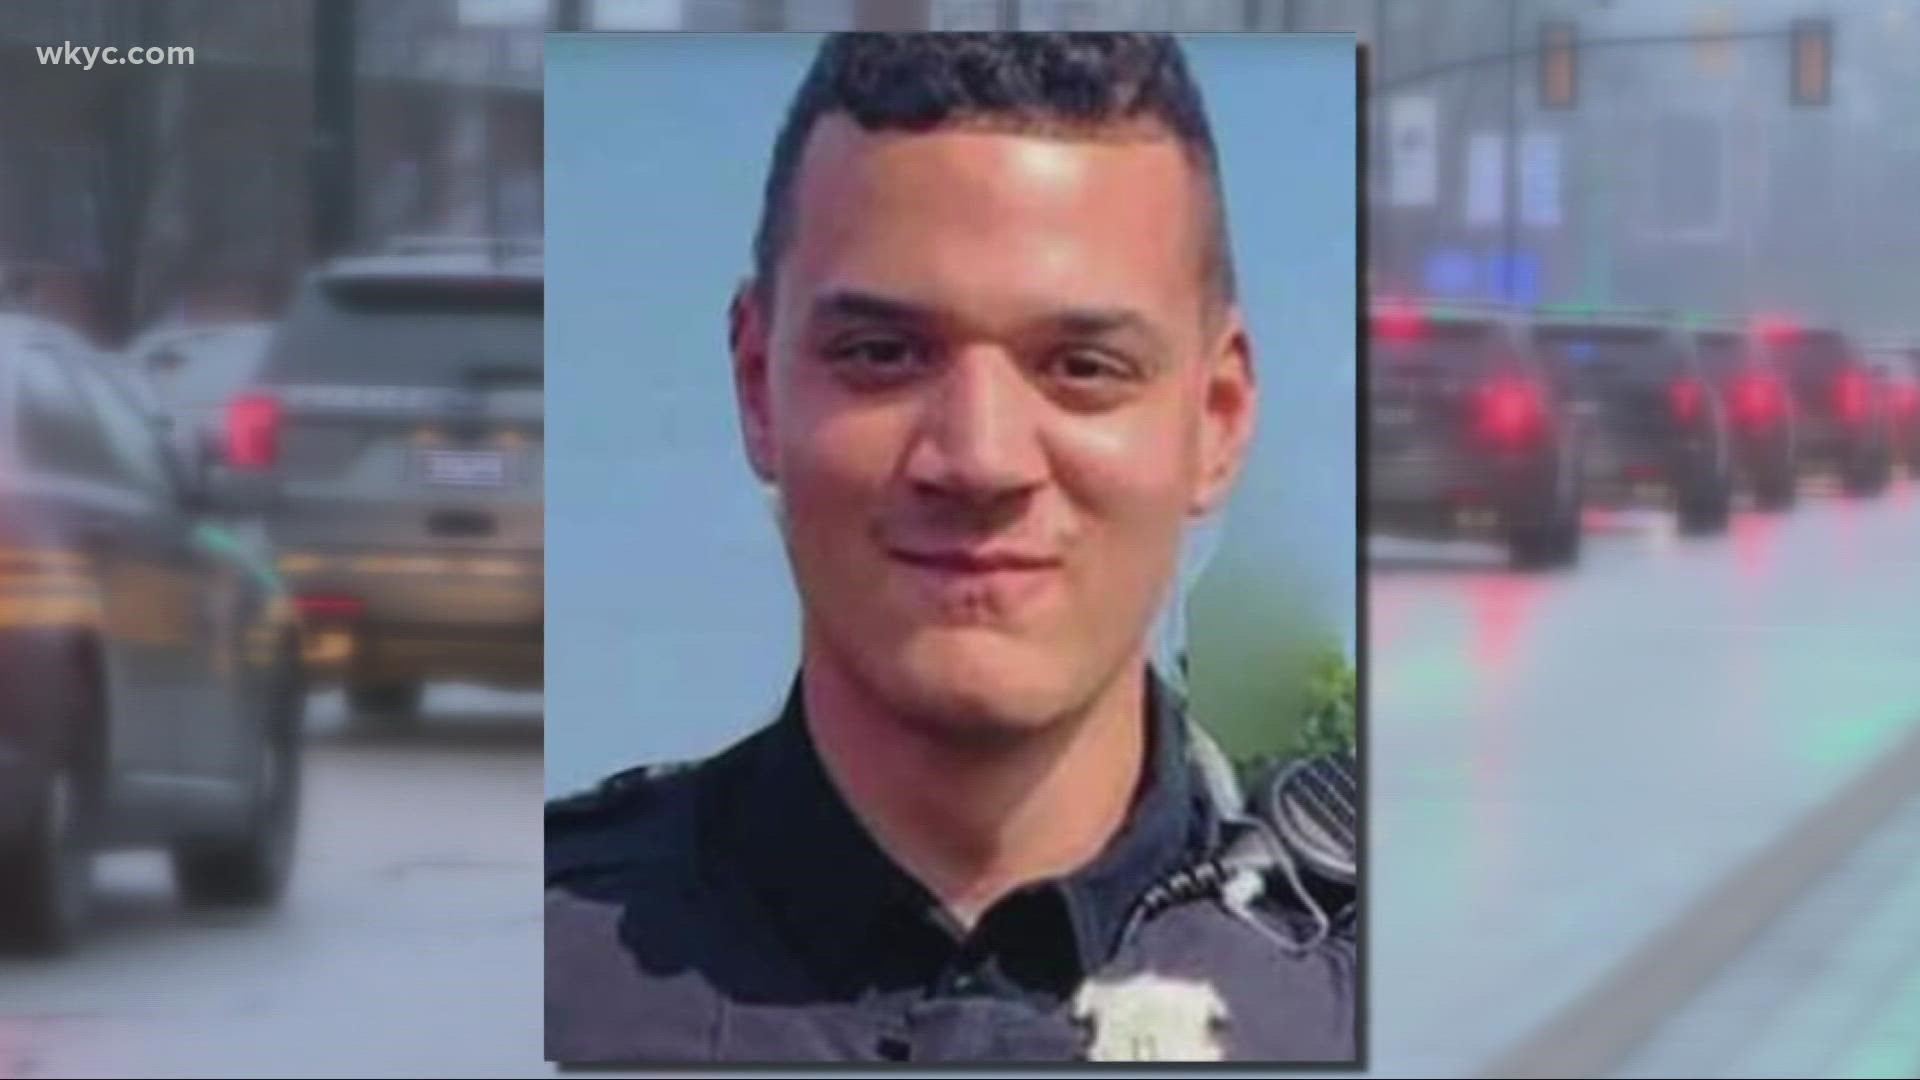 Since Bartek was shot and killed while off duty, the city is not obligated to pay for the services. Cleveland's police union wants to change that.